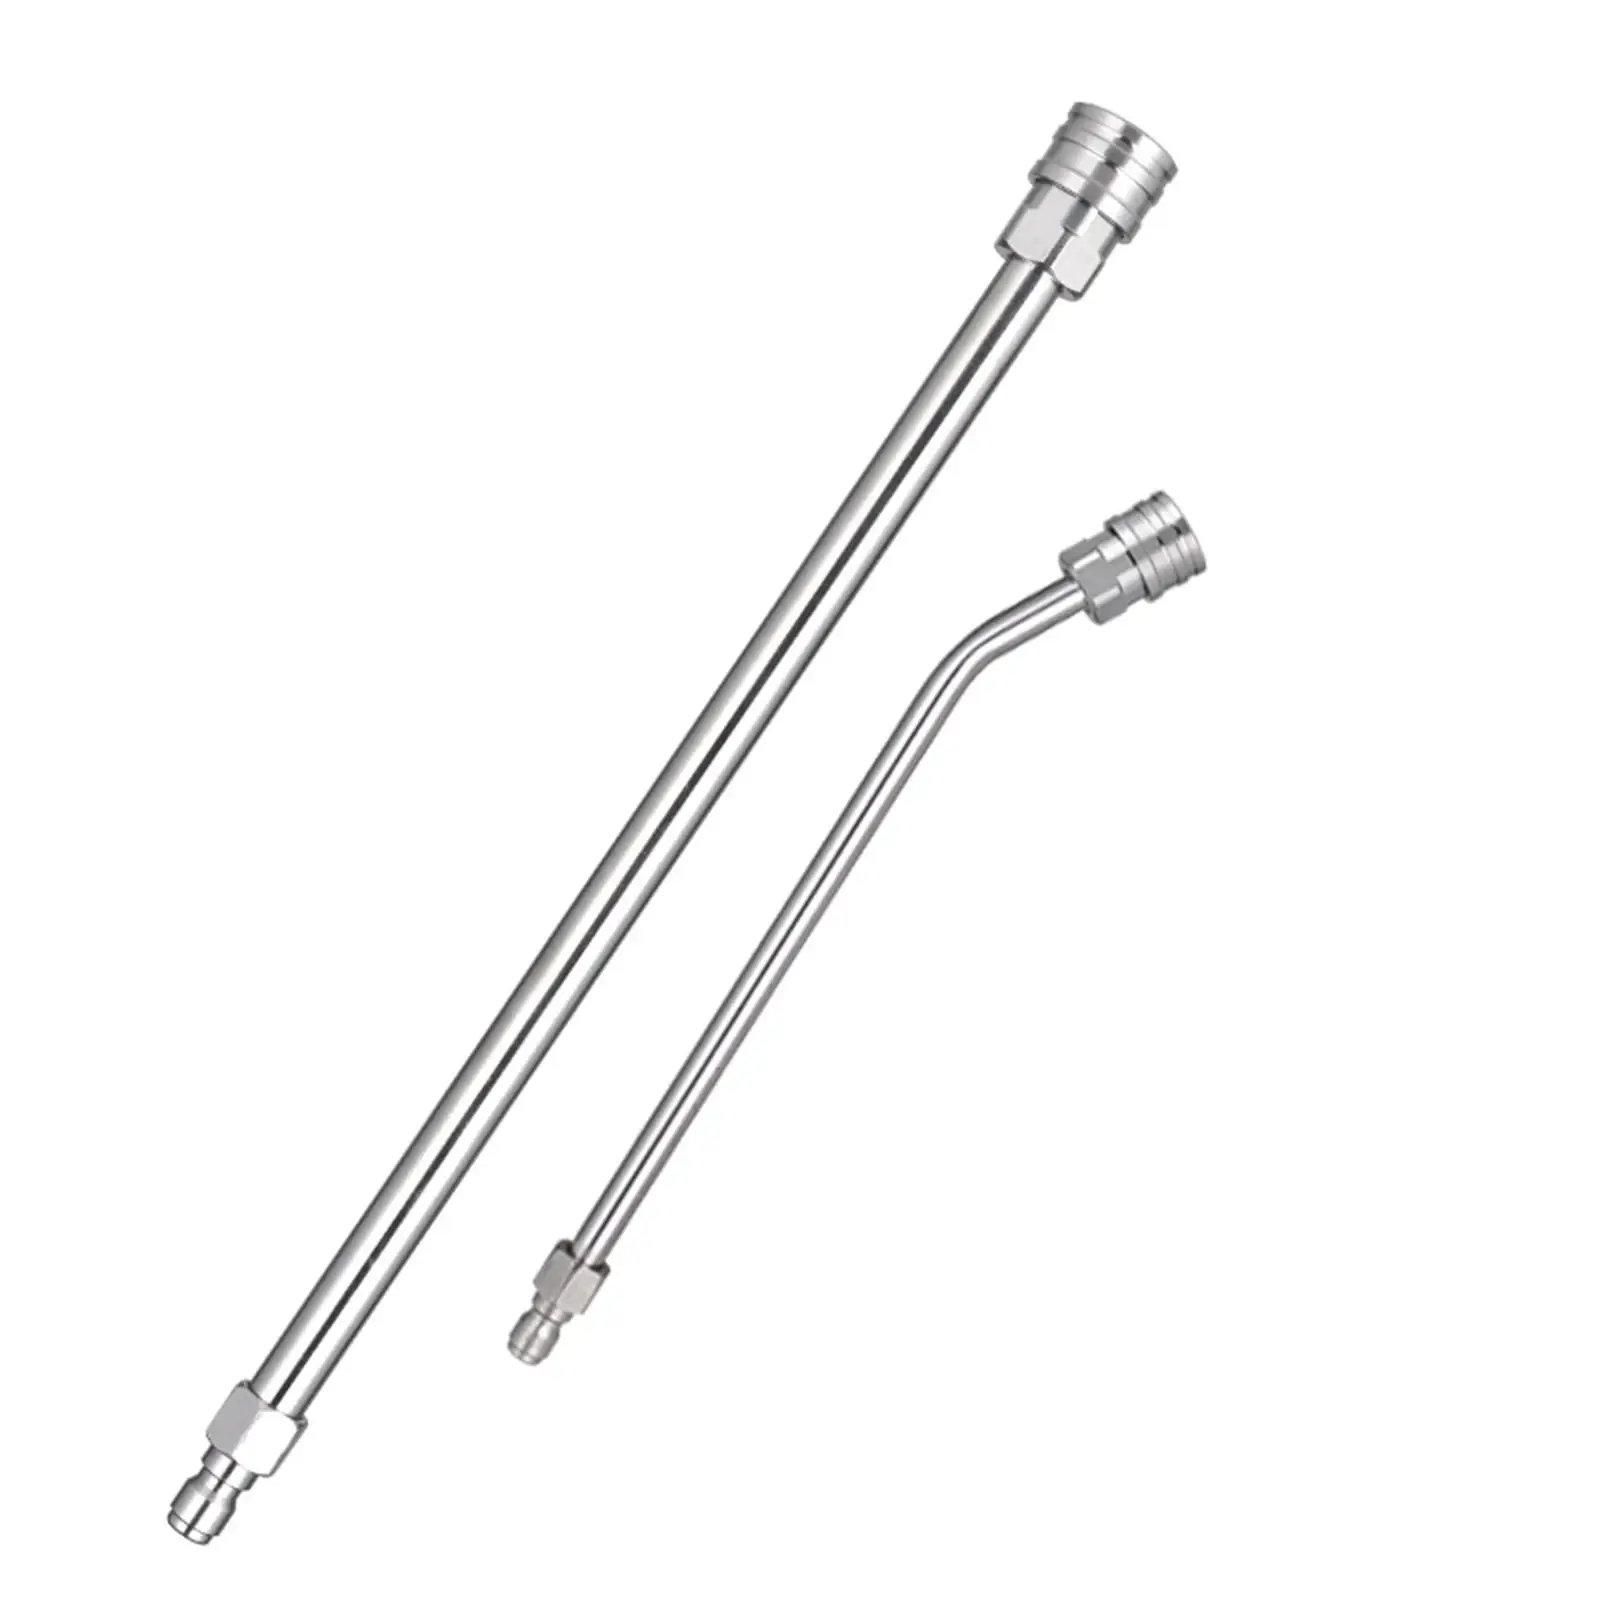 2 Pieces Washer Extension Wands Professional Accs 1/4Quick Connect Power Washer Lance for Cleaning Driveway Home Patio Wall